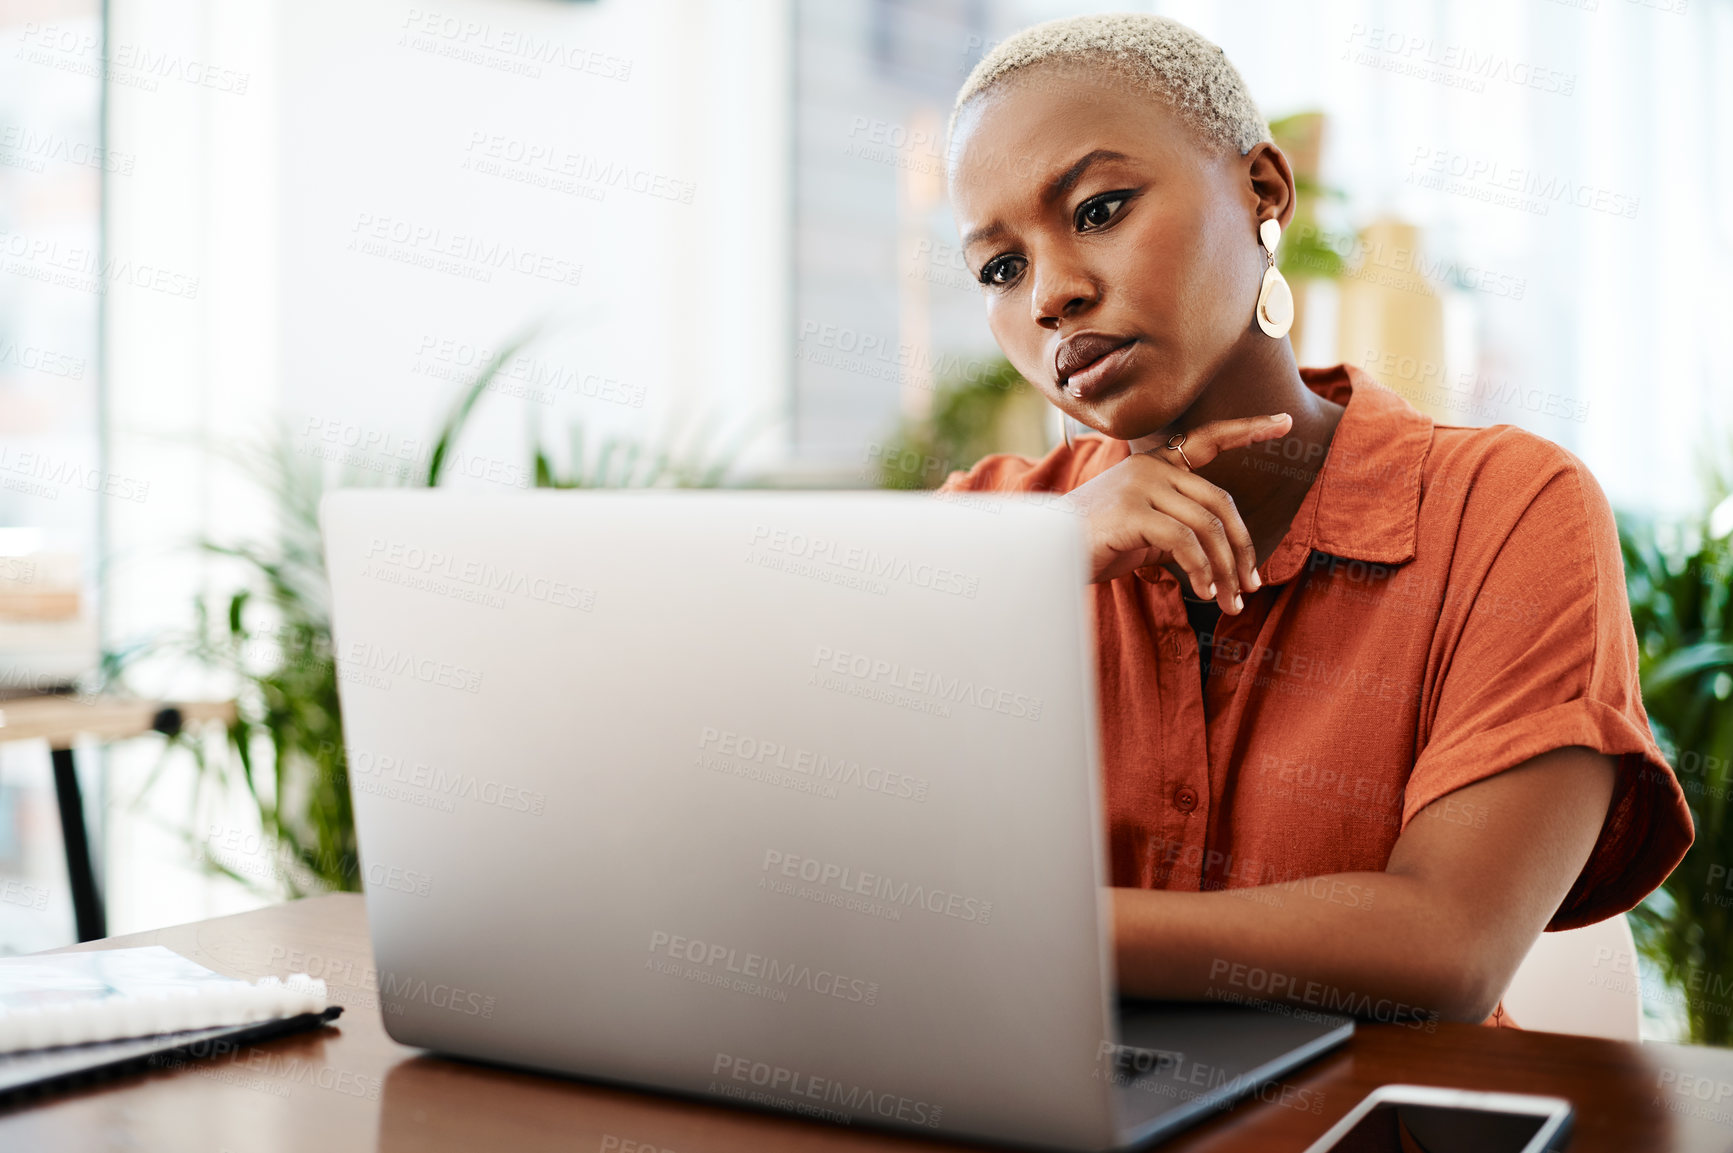 Buy stock photo Shot of a young businesswoman looking thoughtful while working on a laptop in an office